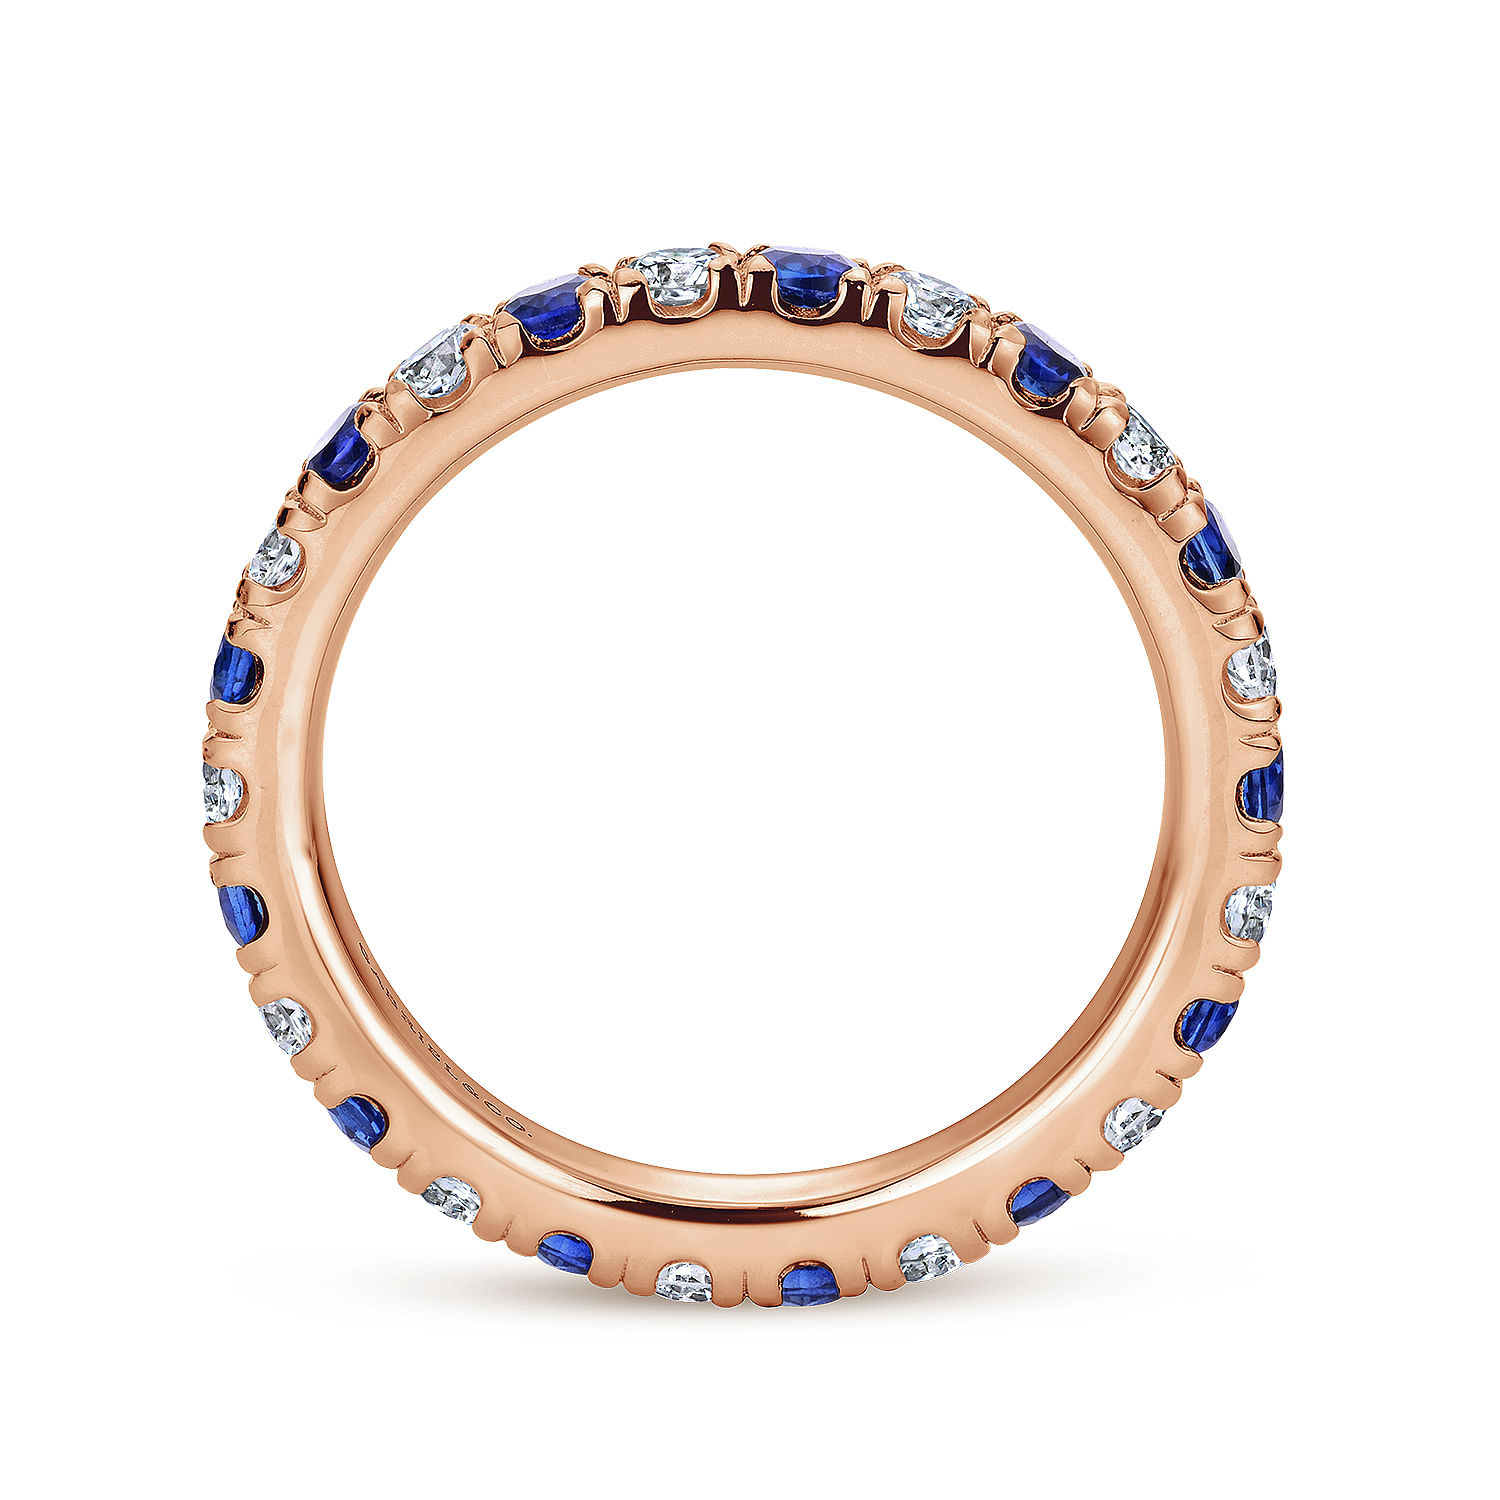 Bari - French Pave  Eternity Sapphire and Diamond Ring in 14K Rose Gold - 0.73 ct - Shot 2